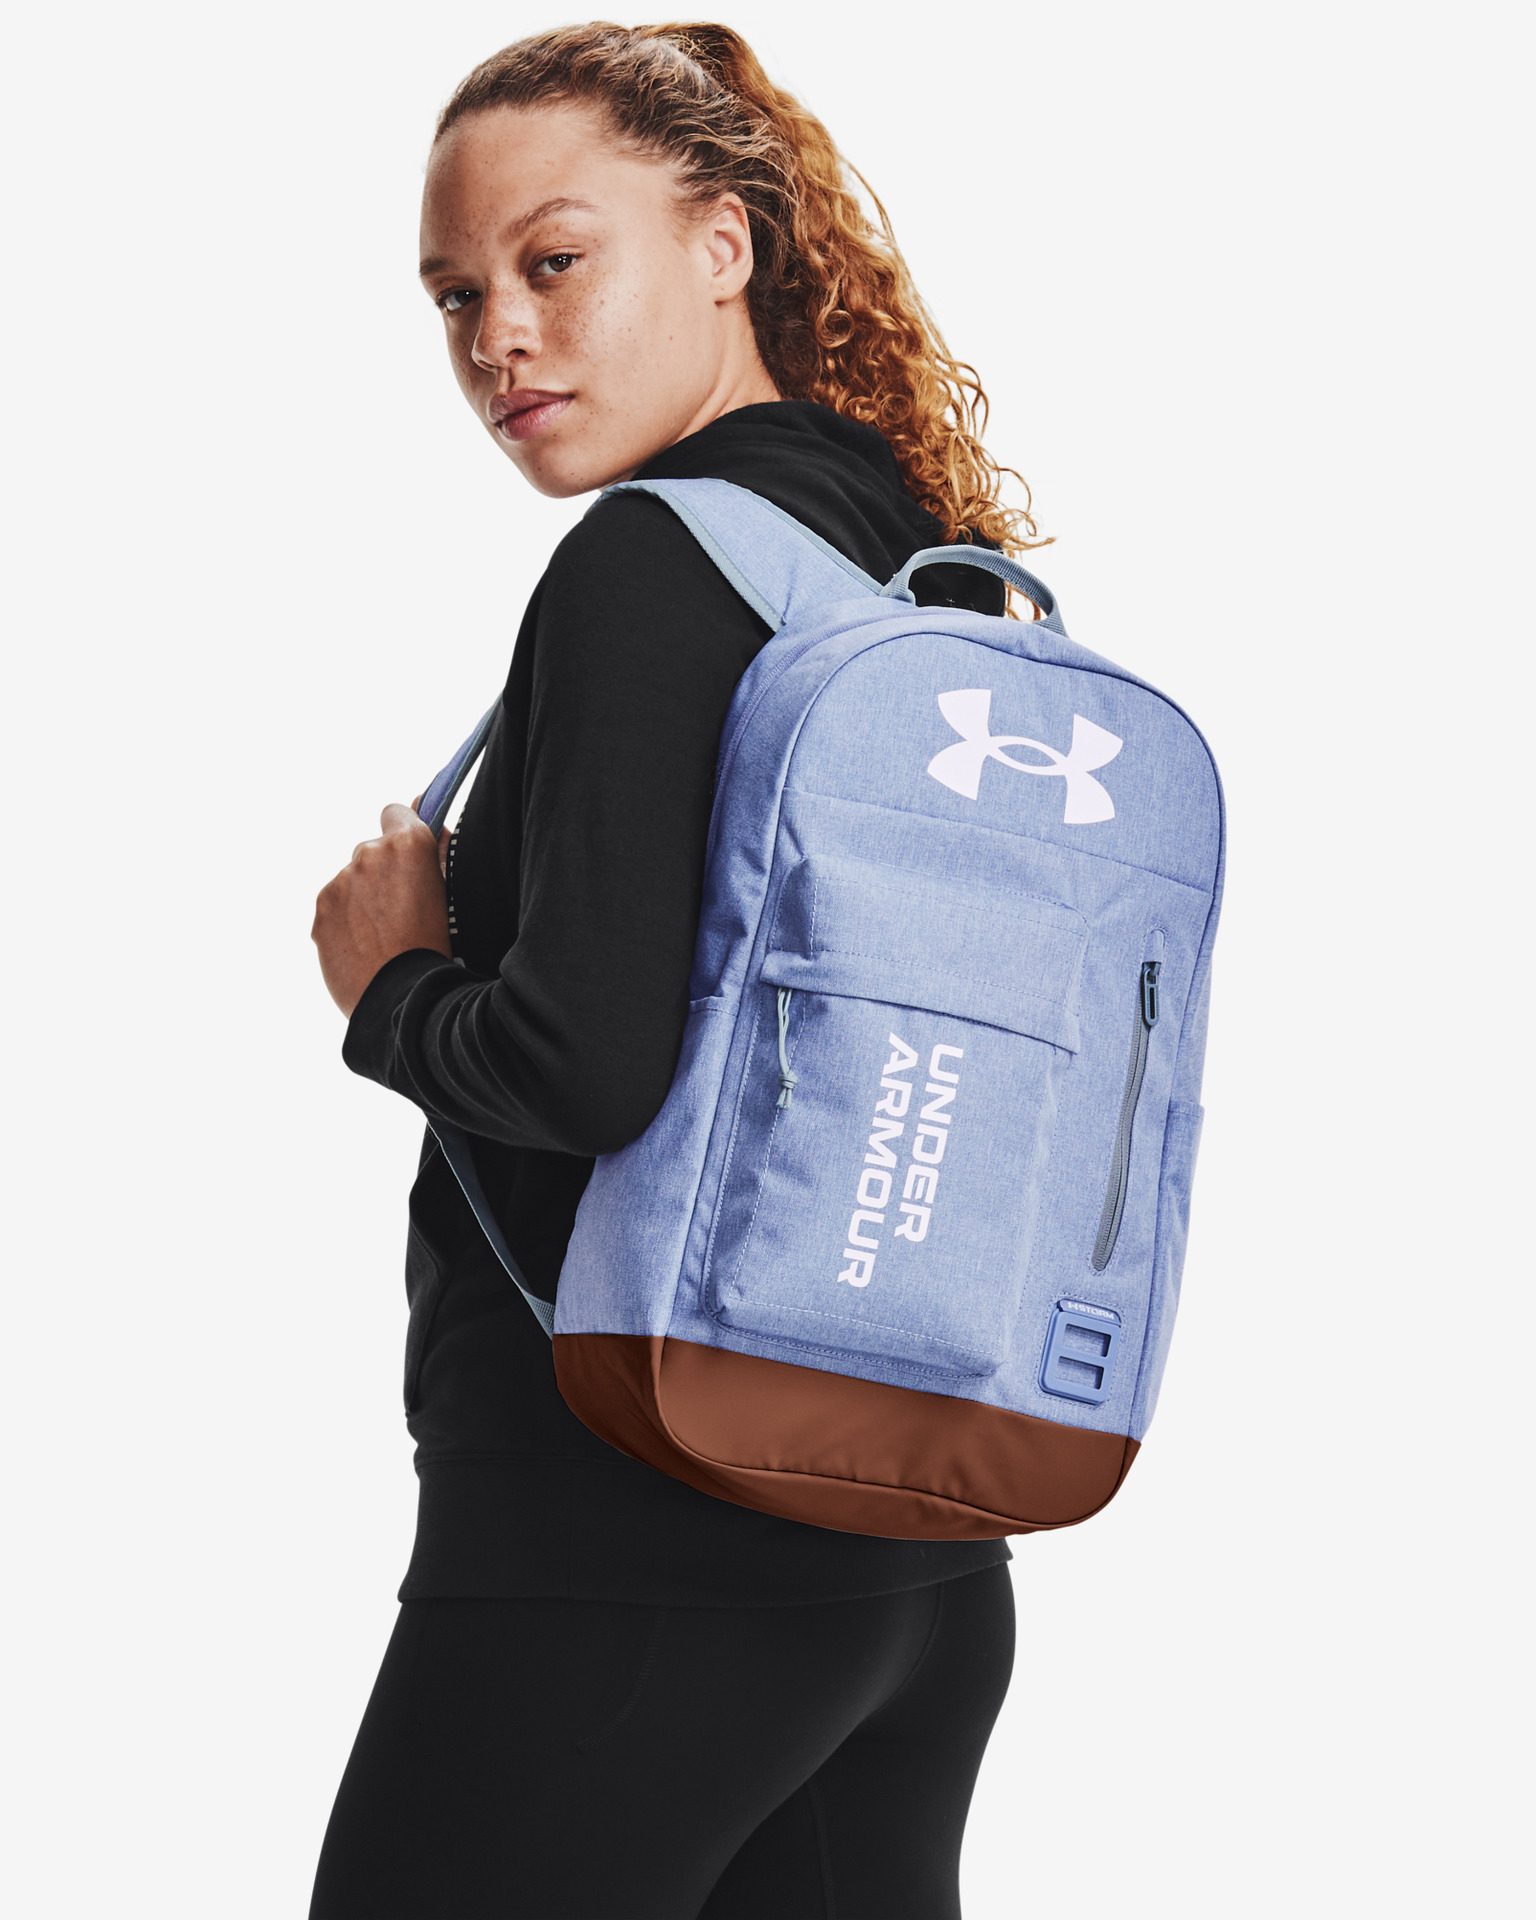 Under Armour Halftime Backpack Midnight Navy